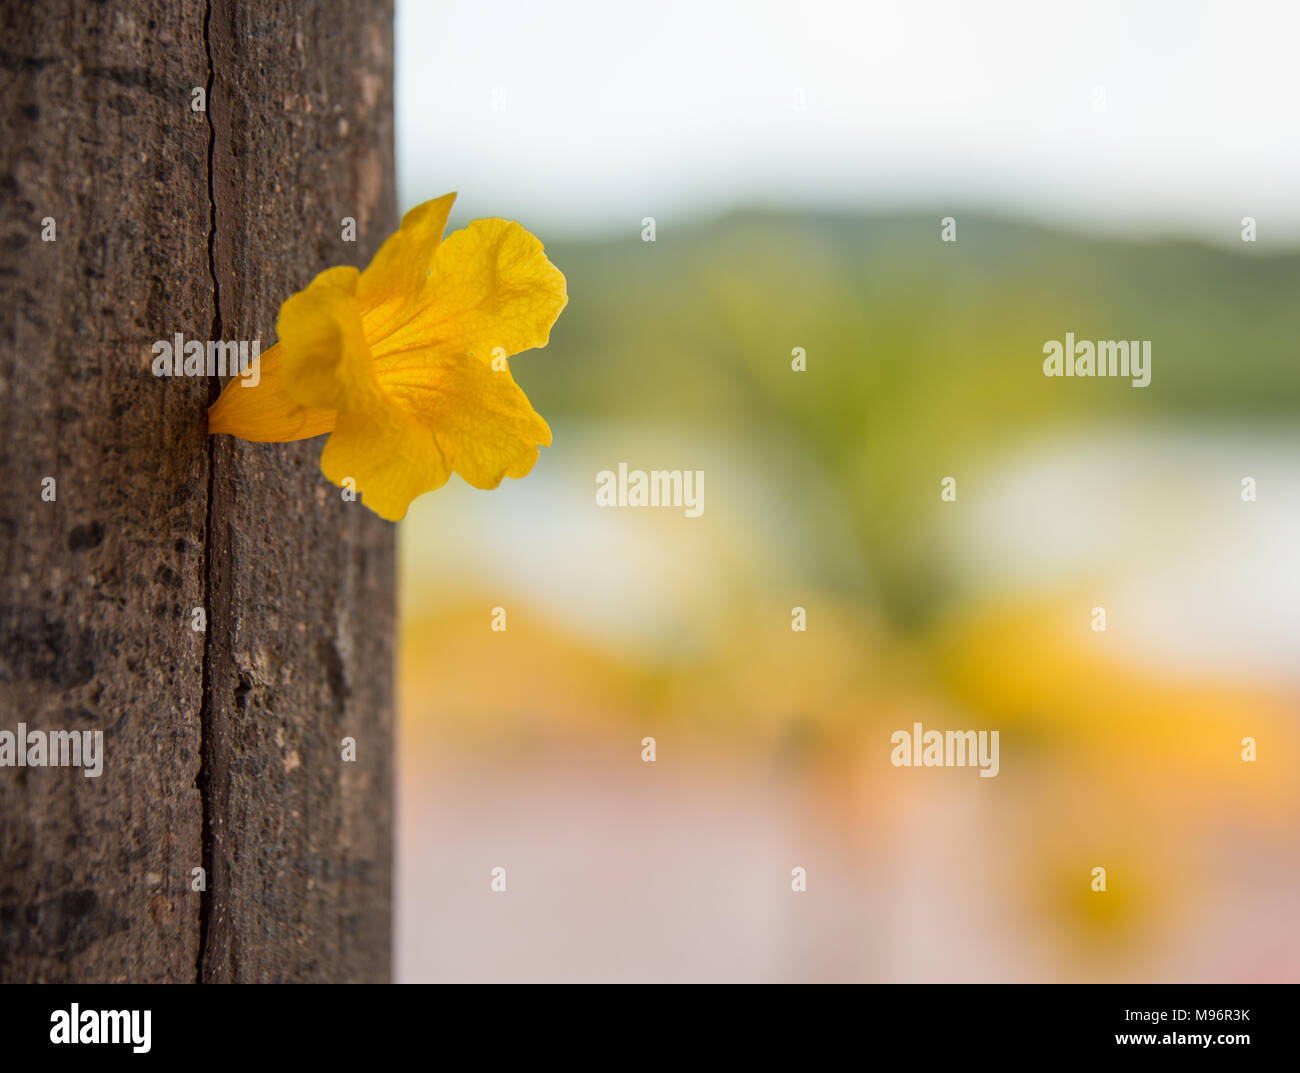 Yellow Trumpet Flower In Tree Trunk Stock Photo